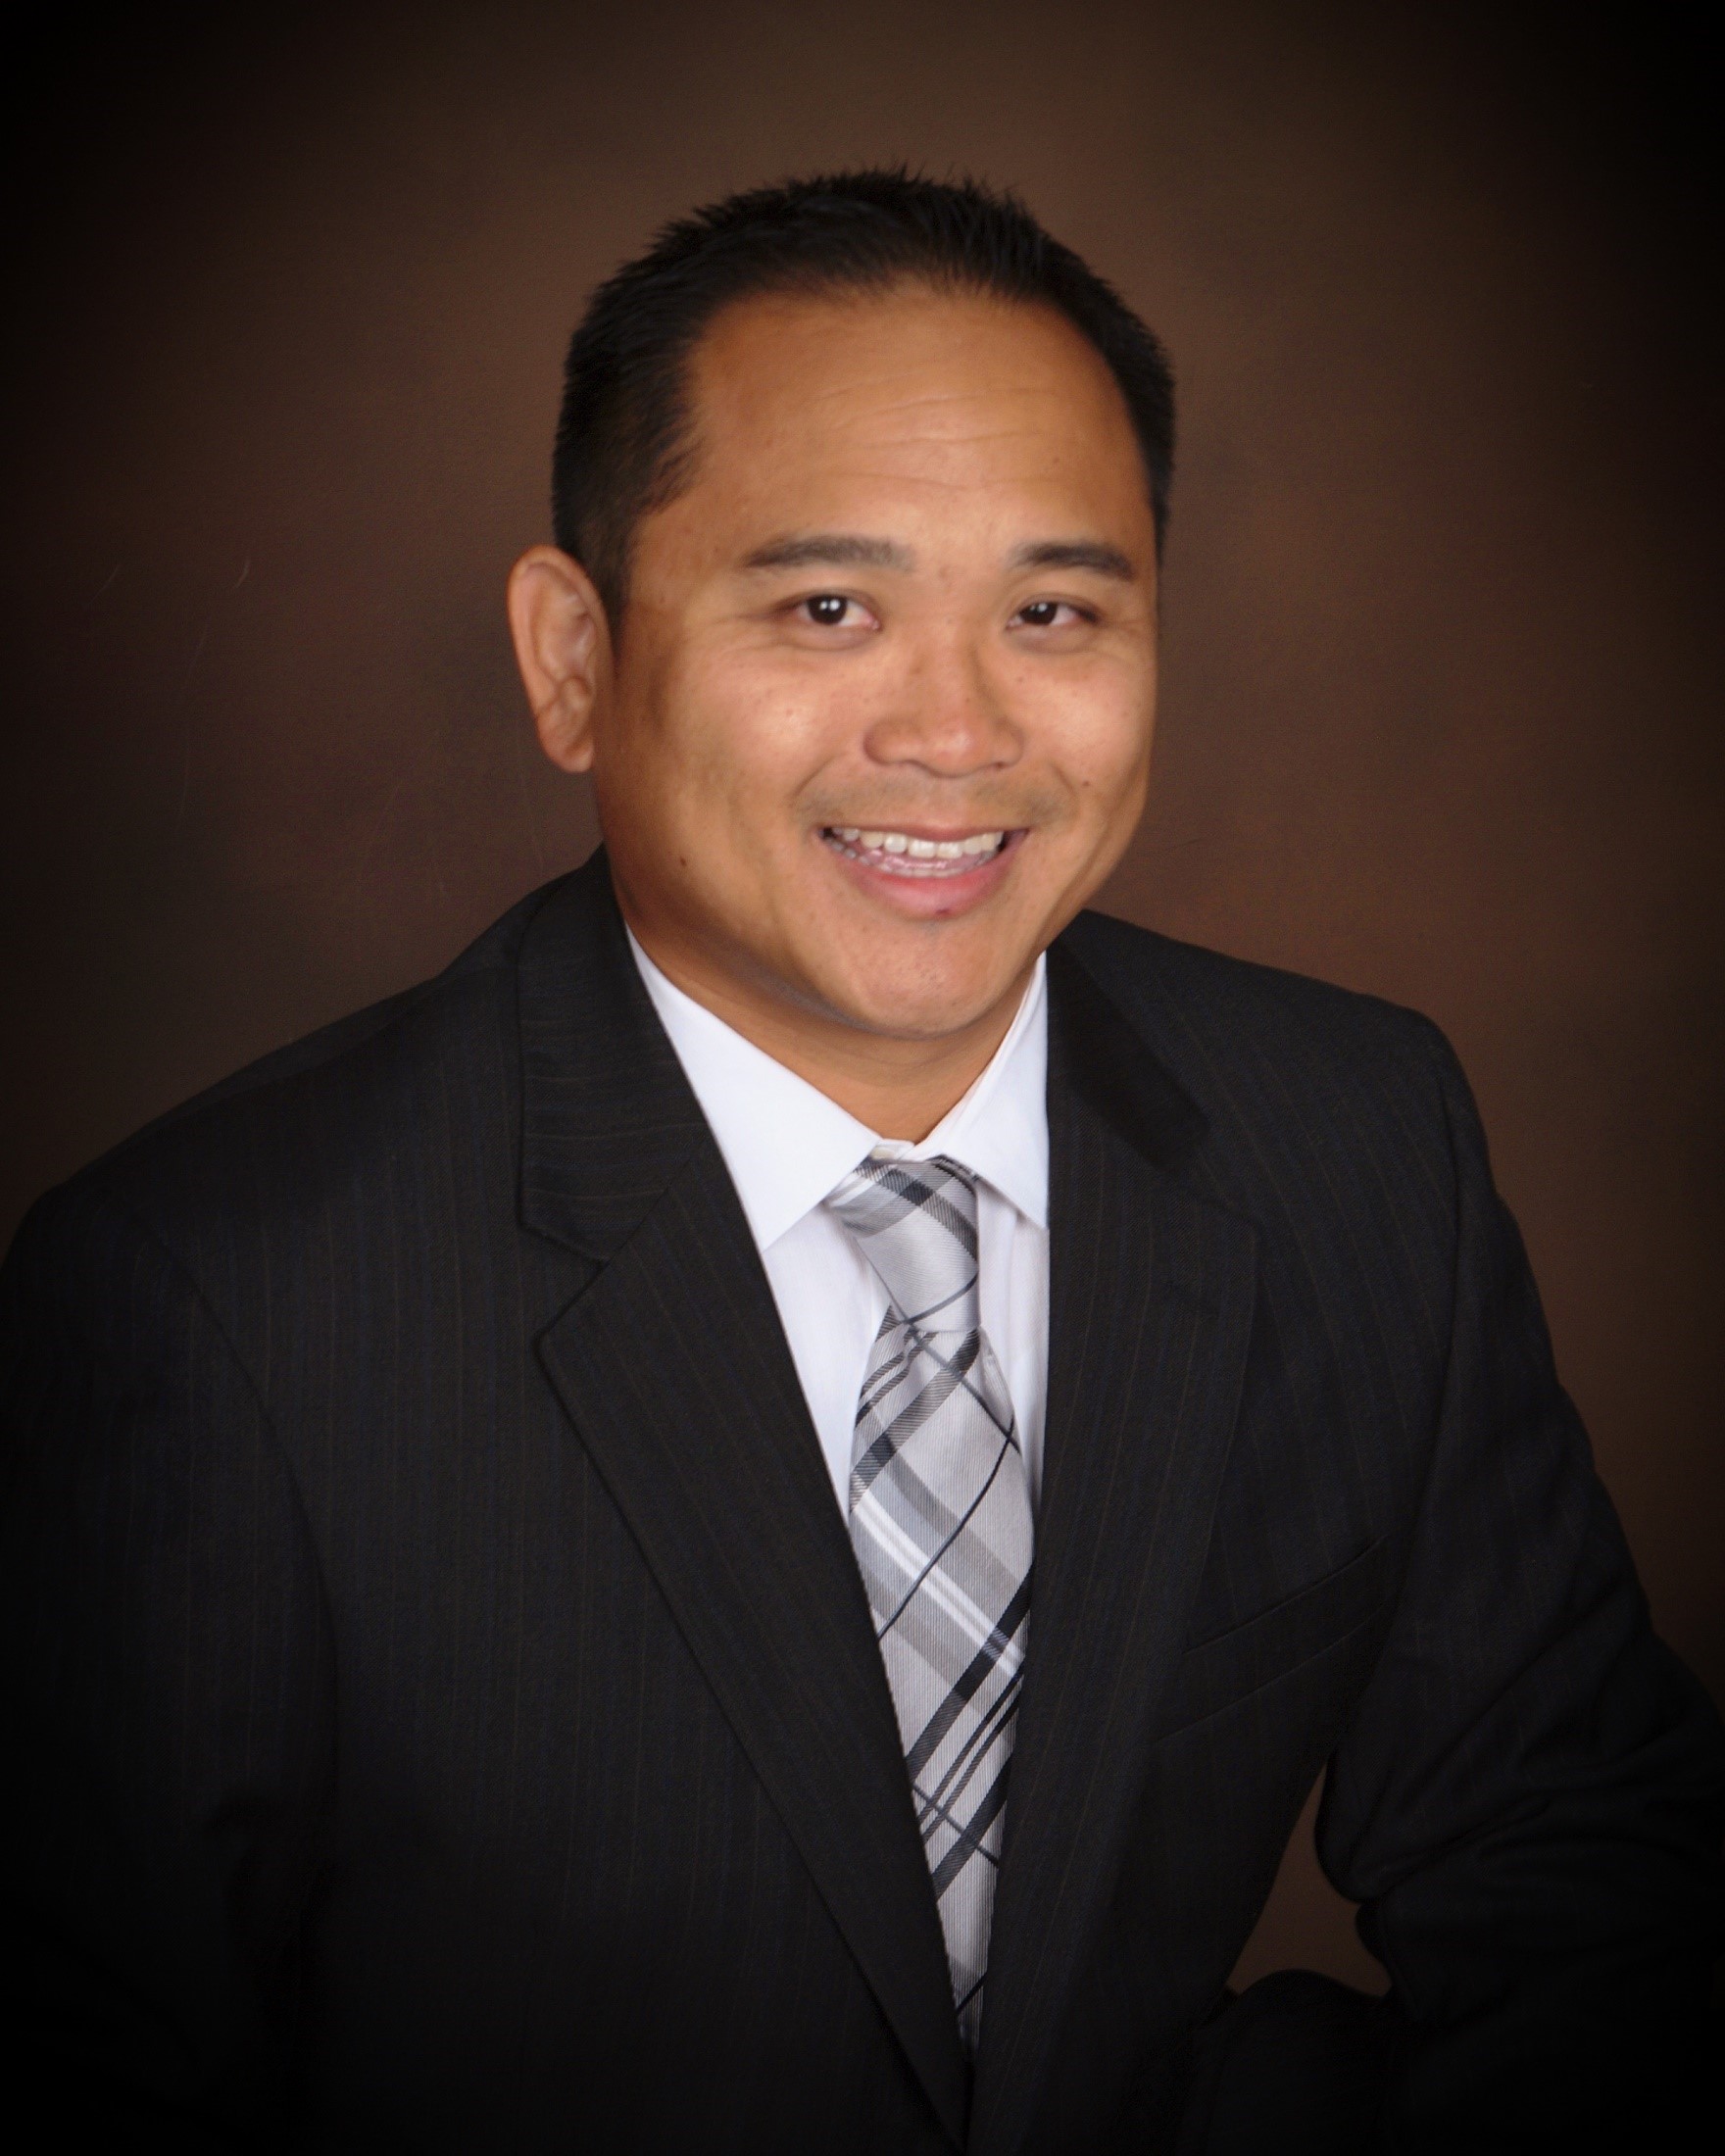 Paul Chen (PC Squared Consultants - Consumer Product Safety, Regulatory Compliance, Quality Assurance Consultant & Expert Witness)